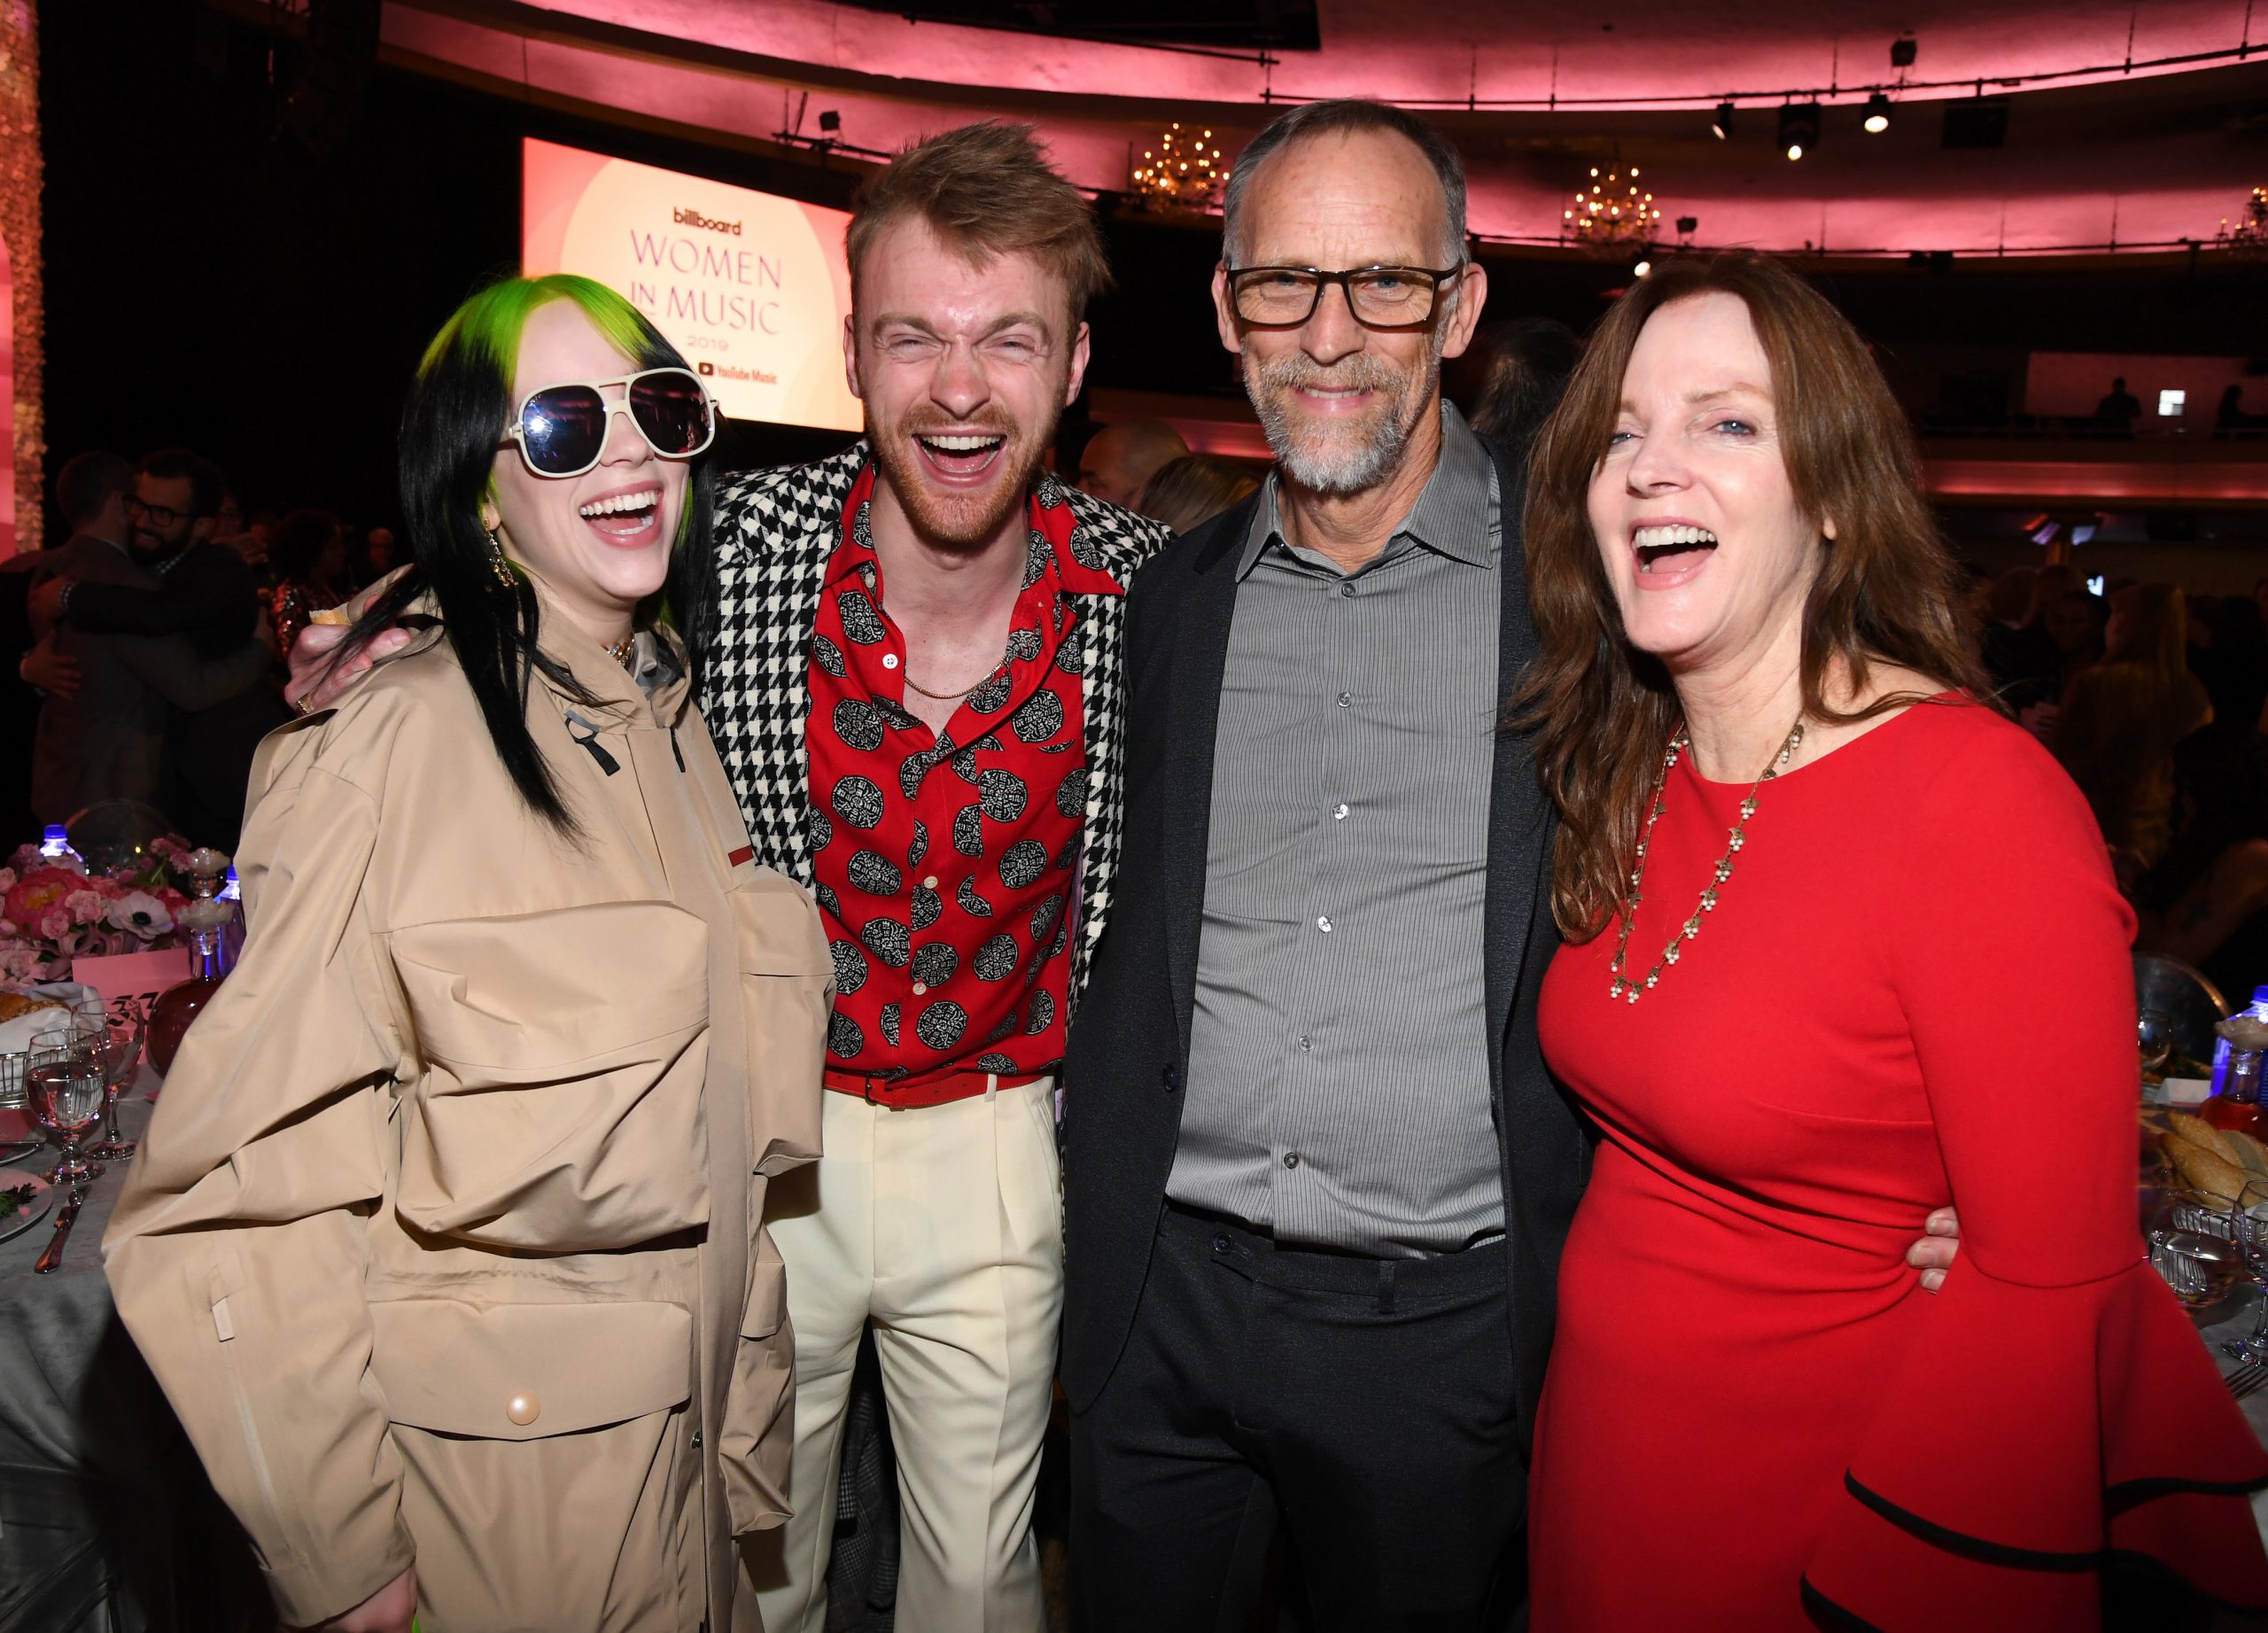 Billie Eilish, Finneas O'Connell, Patrick O'Connell, and Maggie Baird attend Billboard Women In Music 2019